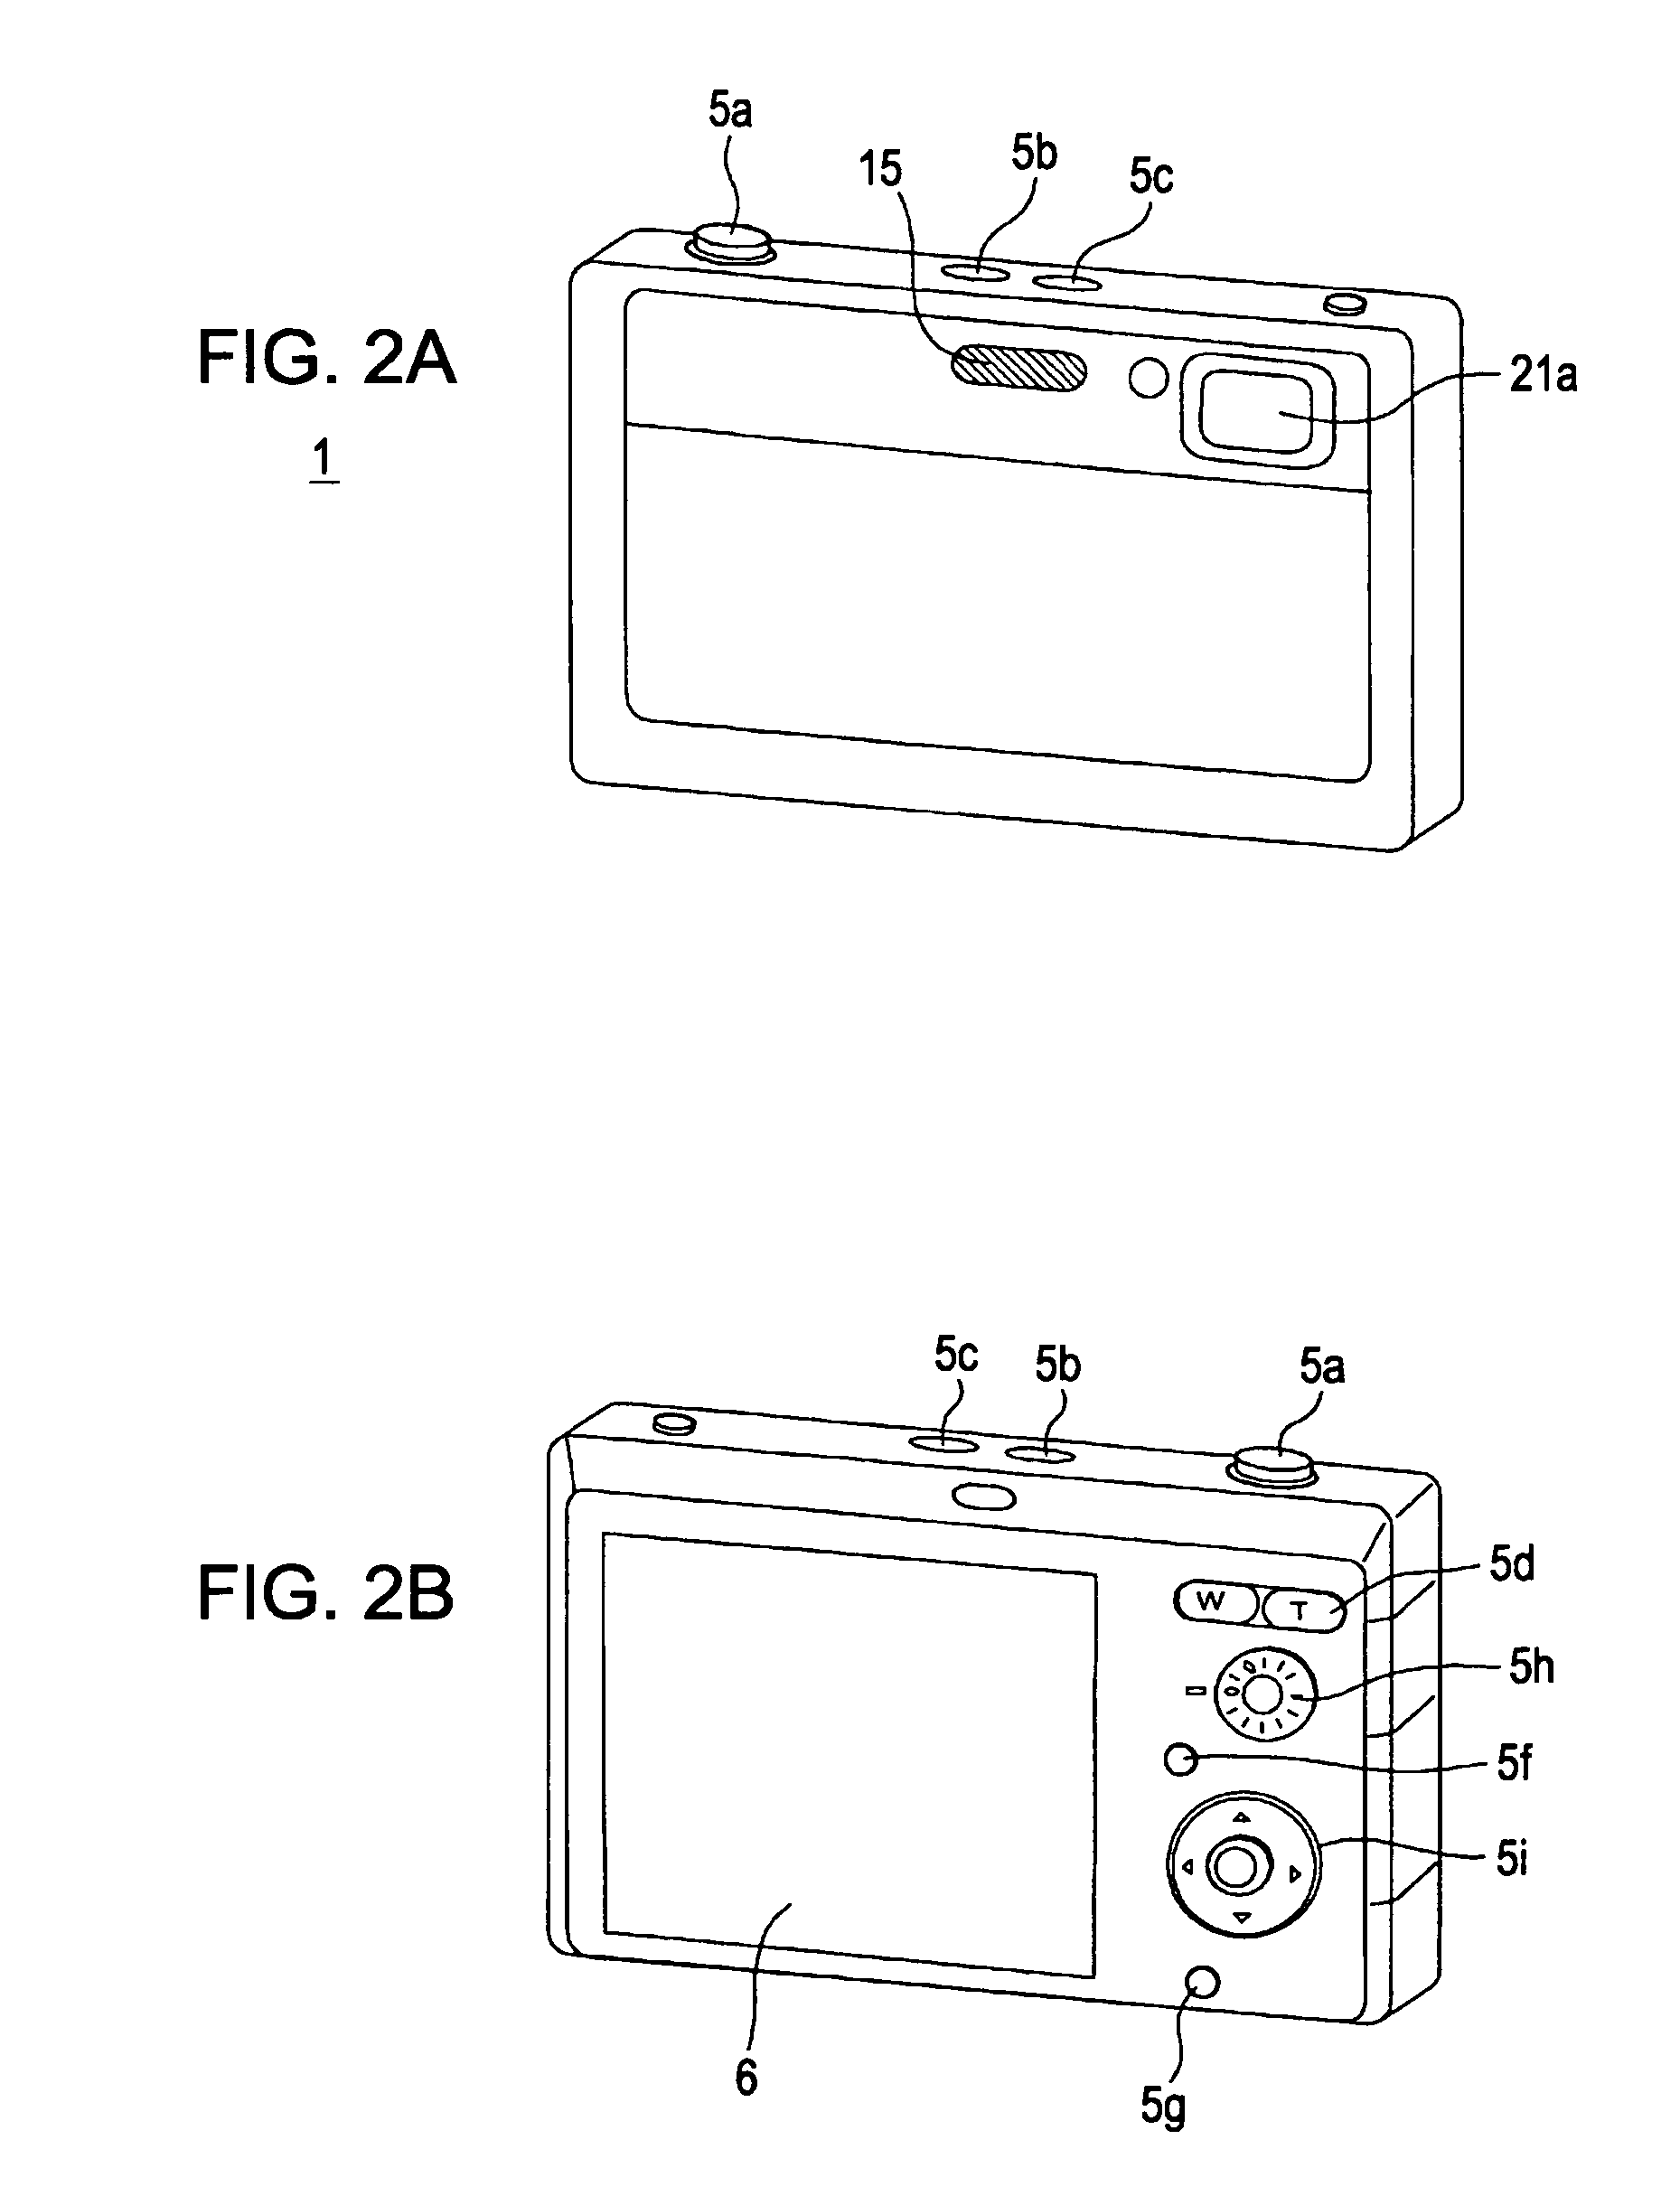 Image capture apparatus and method for generating combined-image data